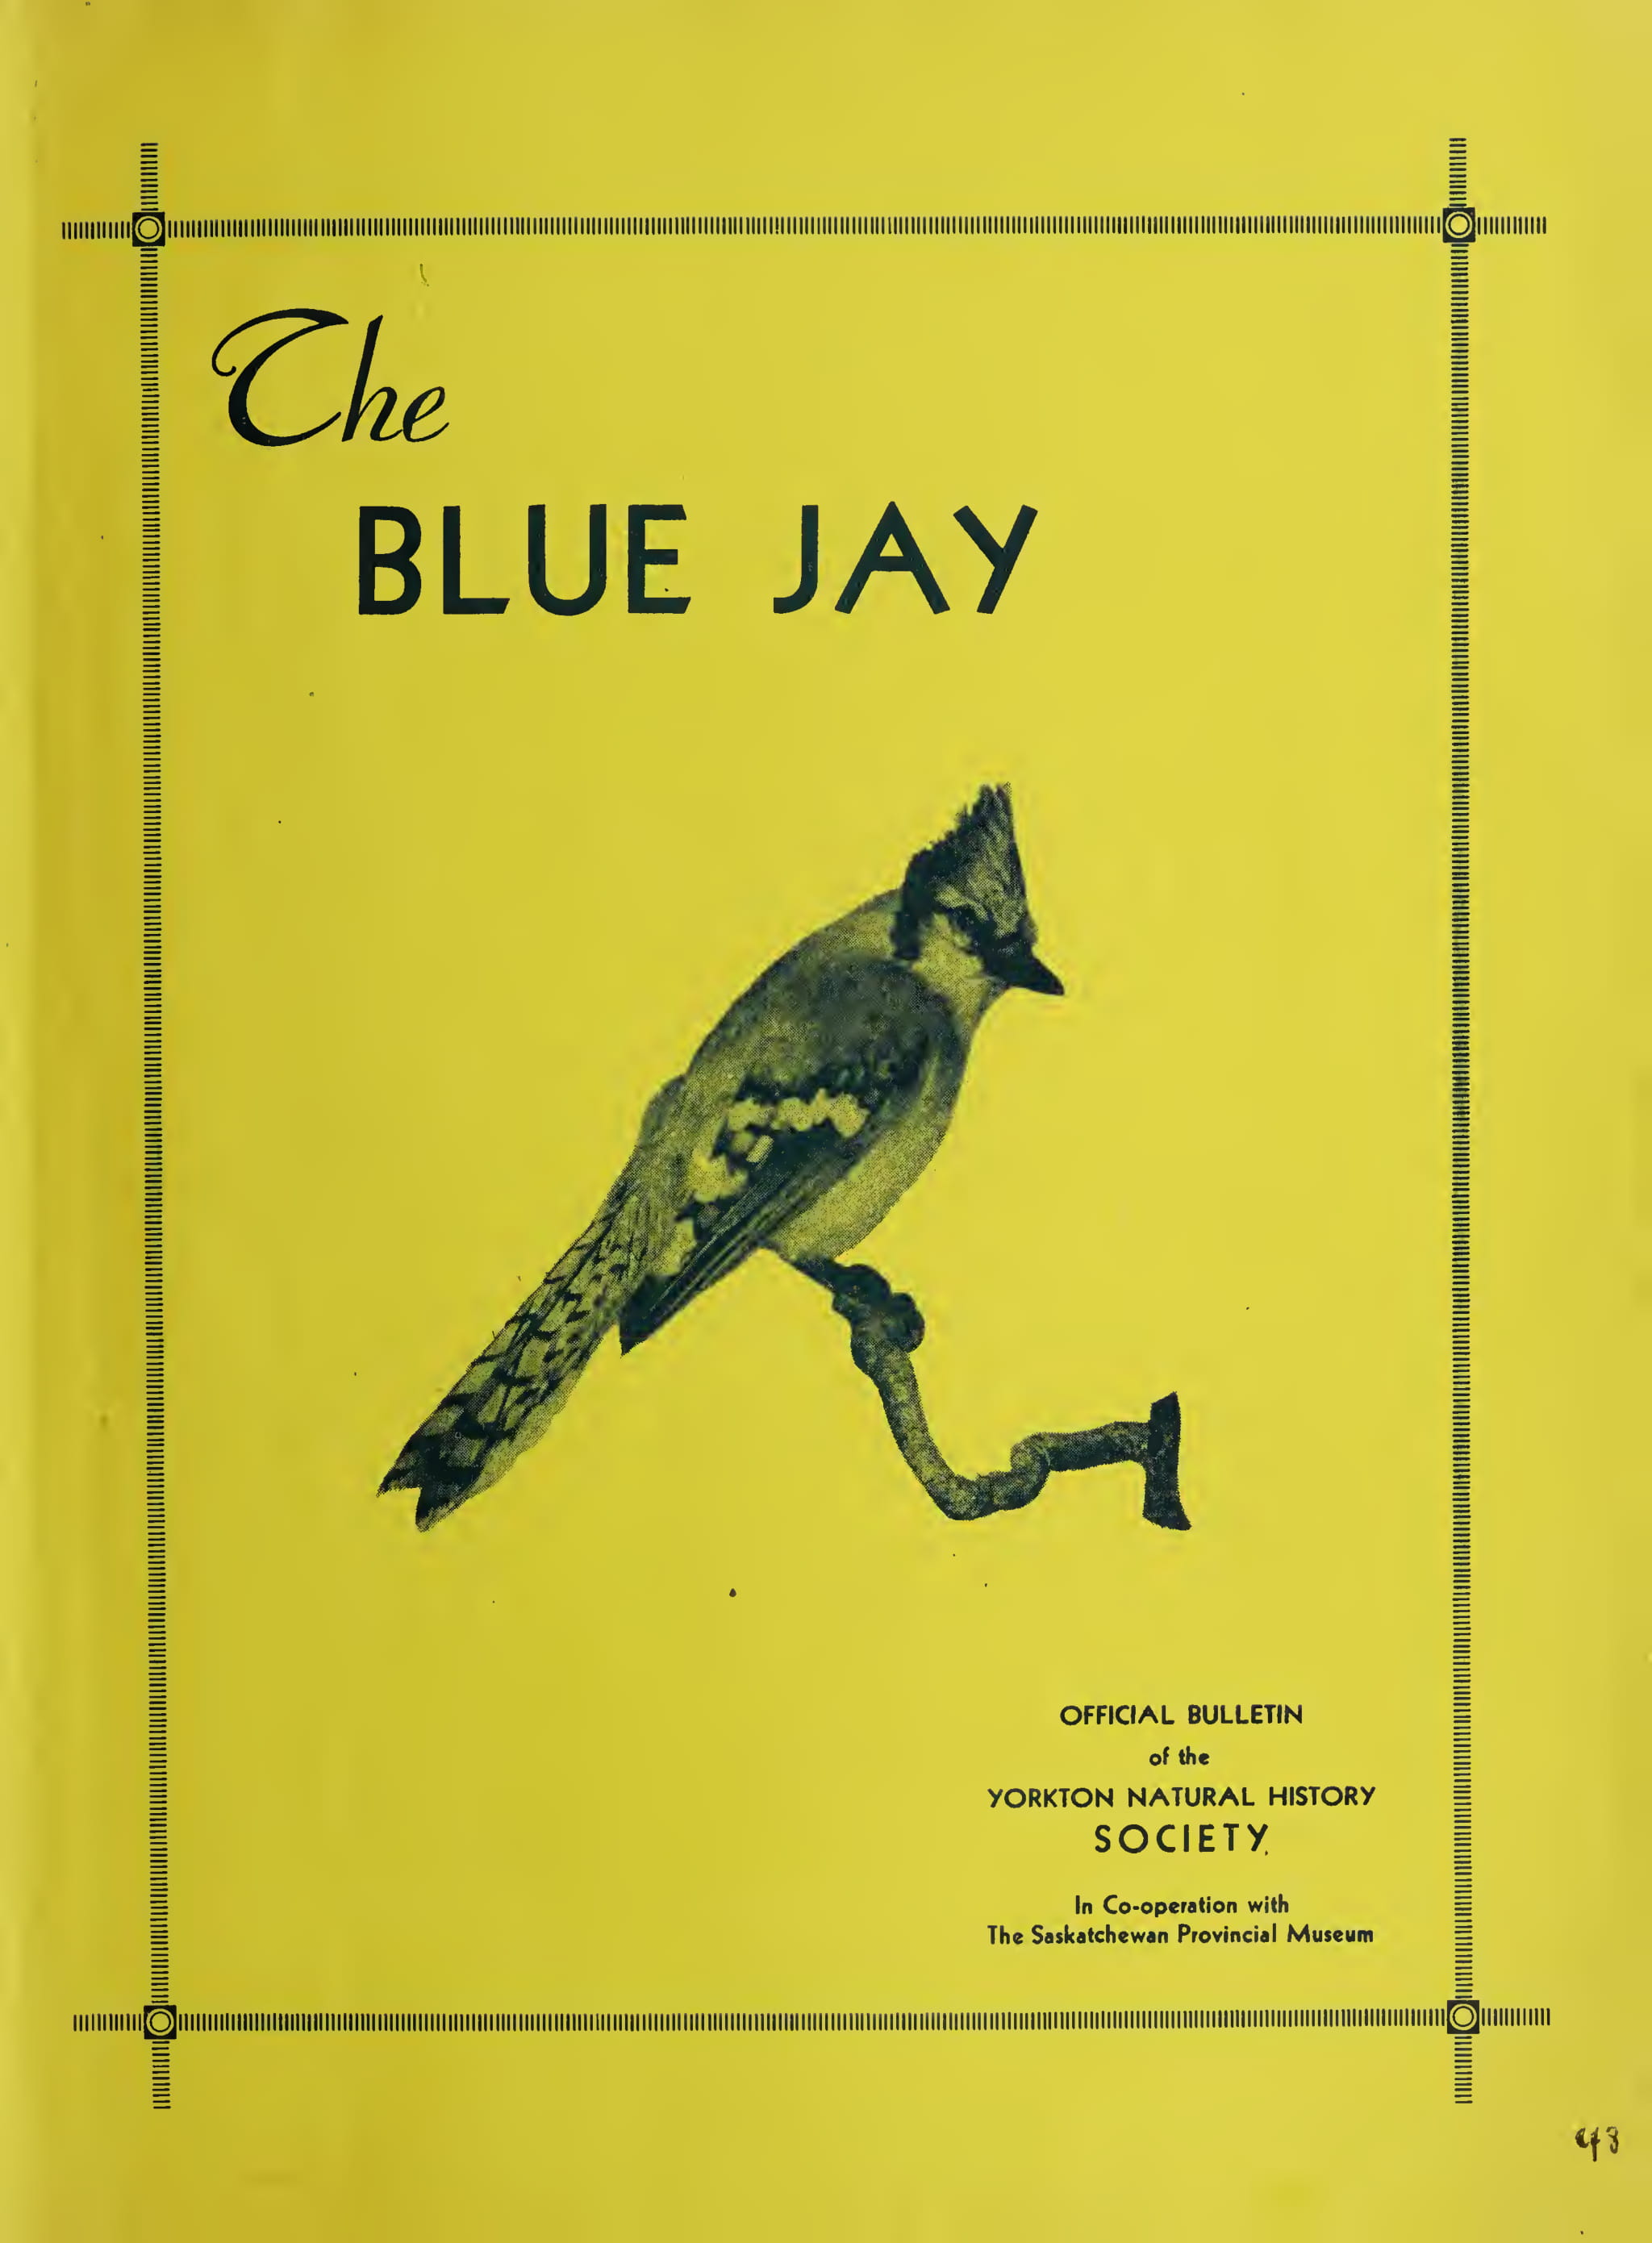 Cover Image for Winter 1948